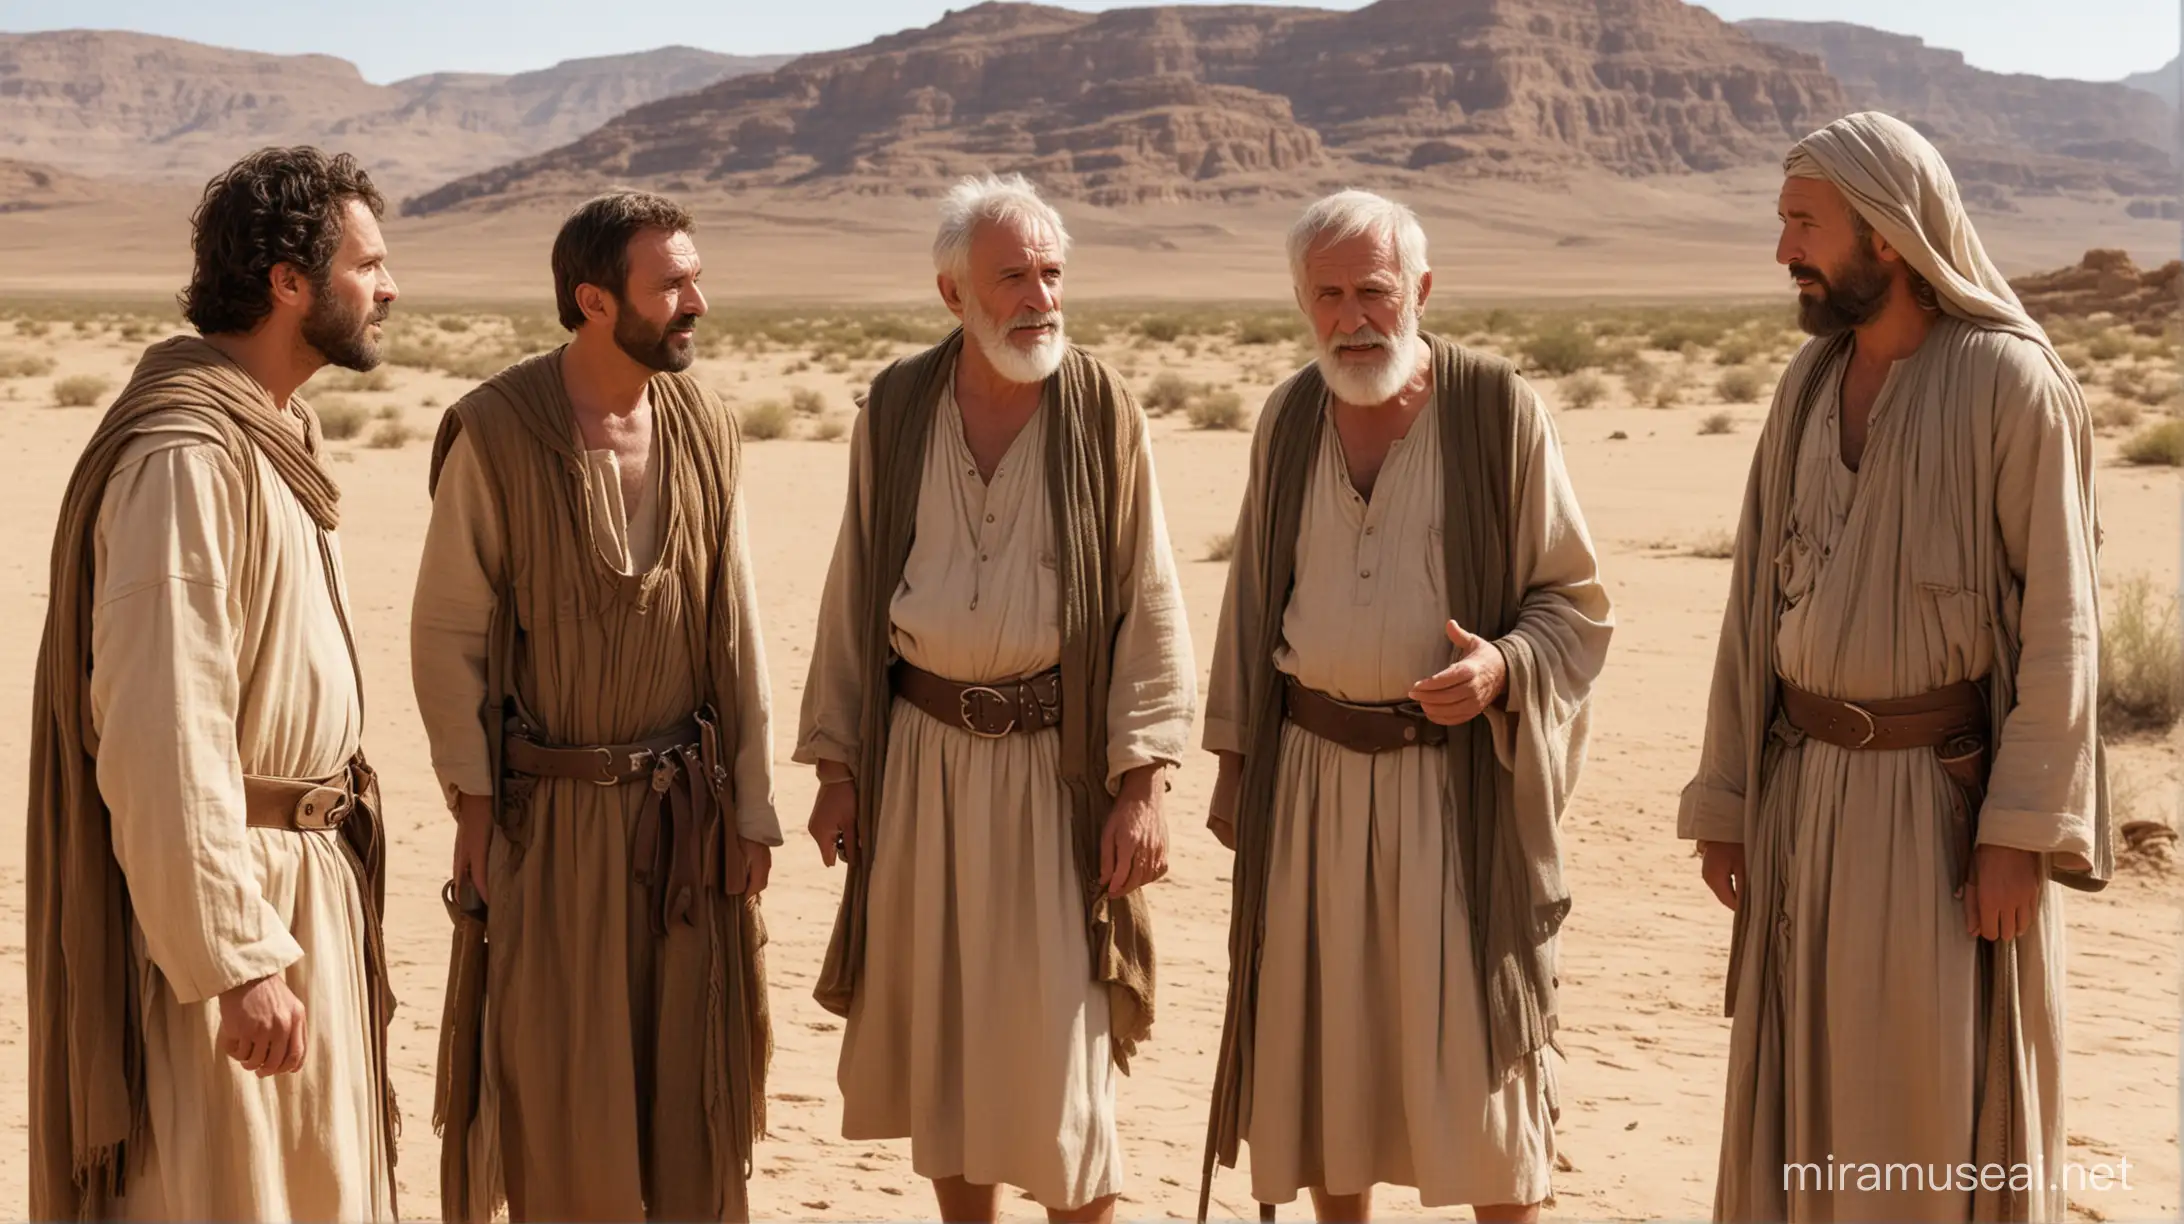 3 respectable and strong looking males  talking to an old man in the desert area set in biblical times